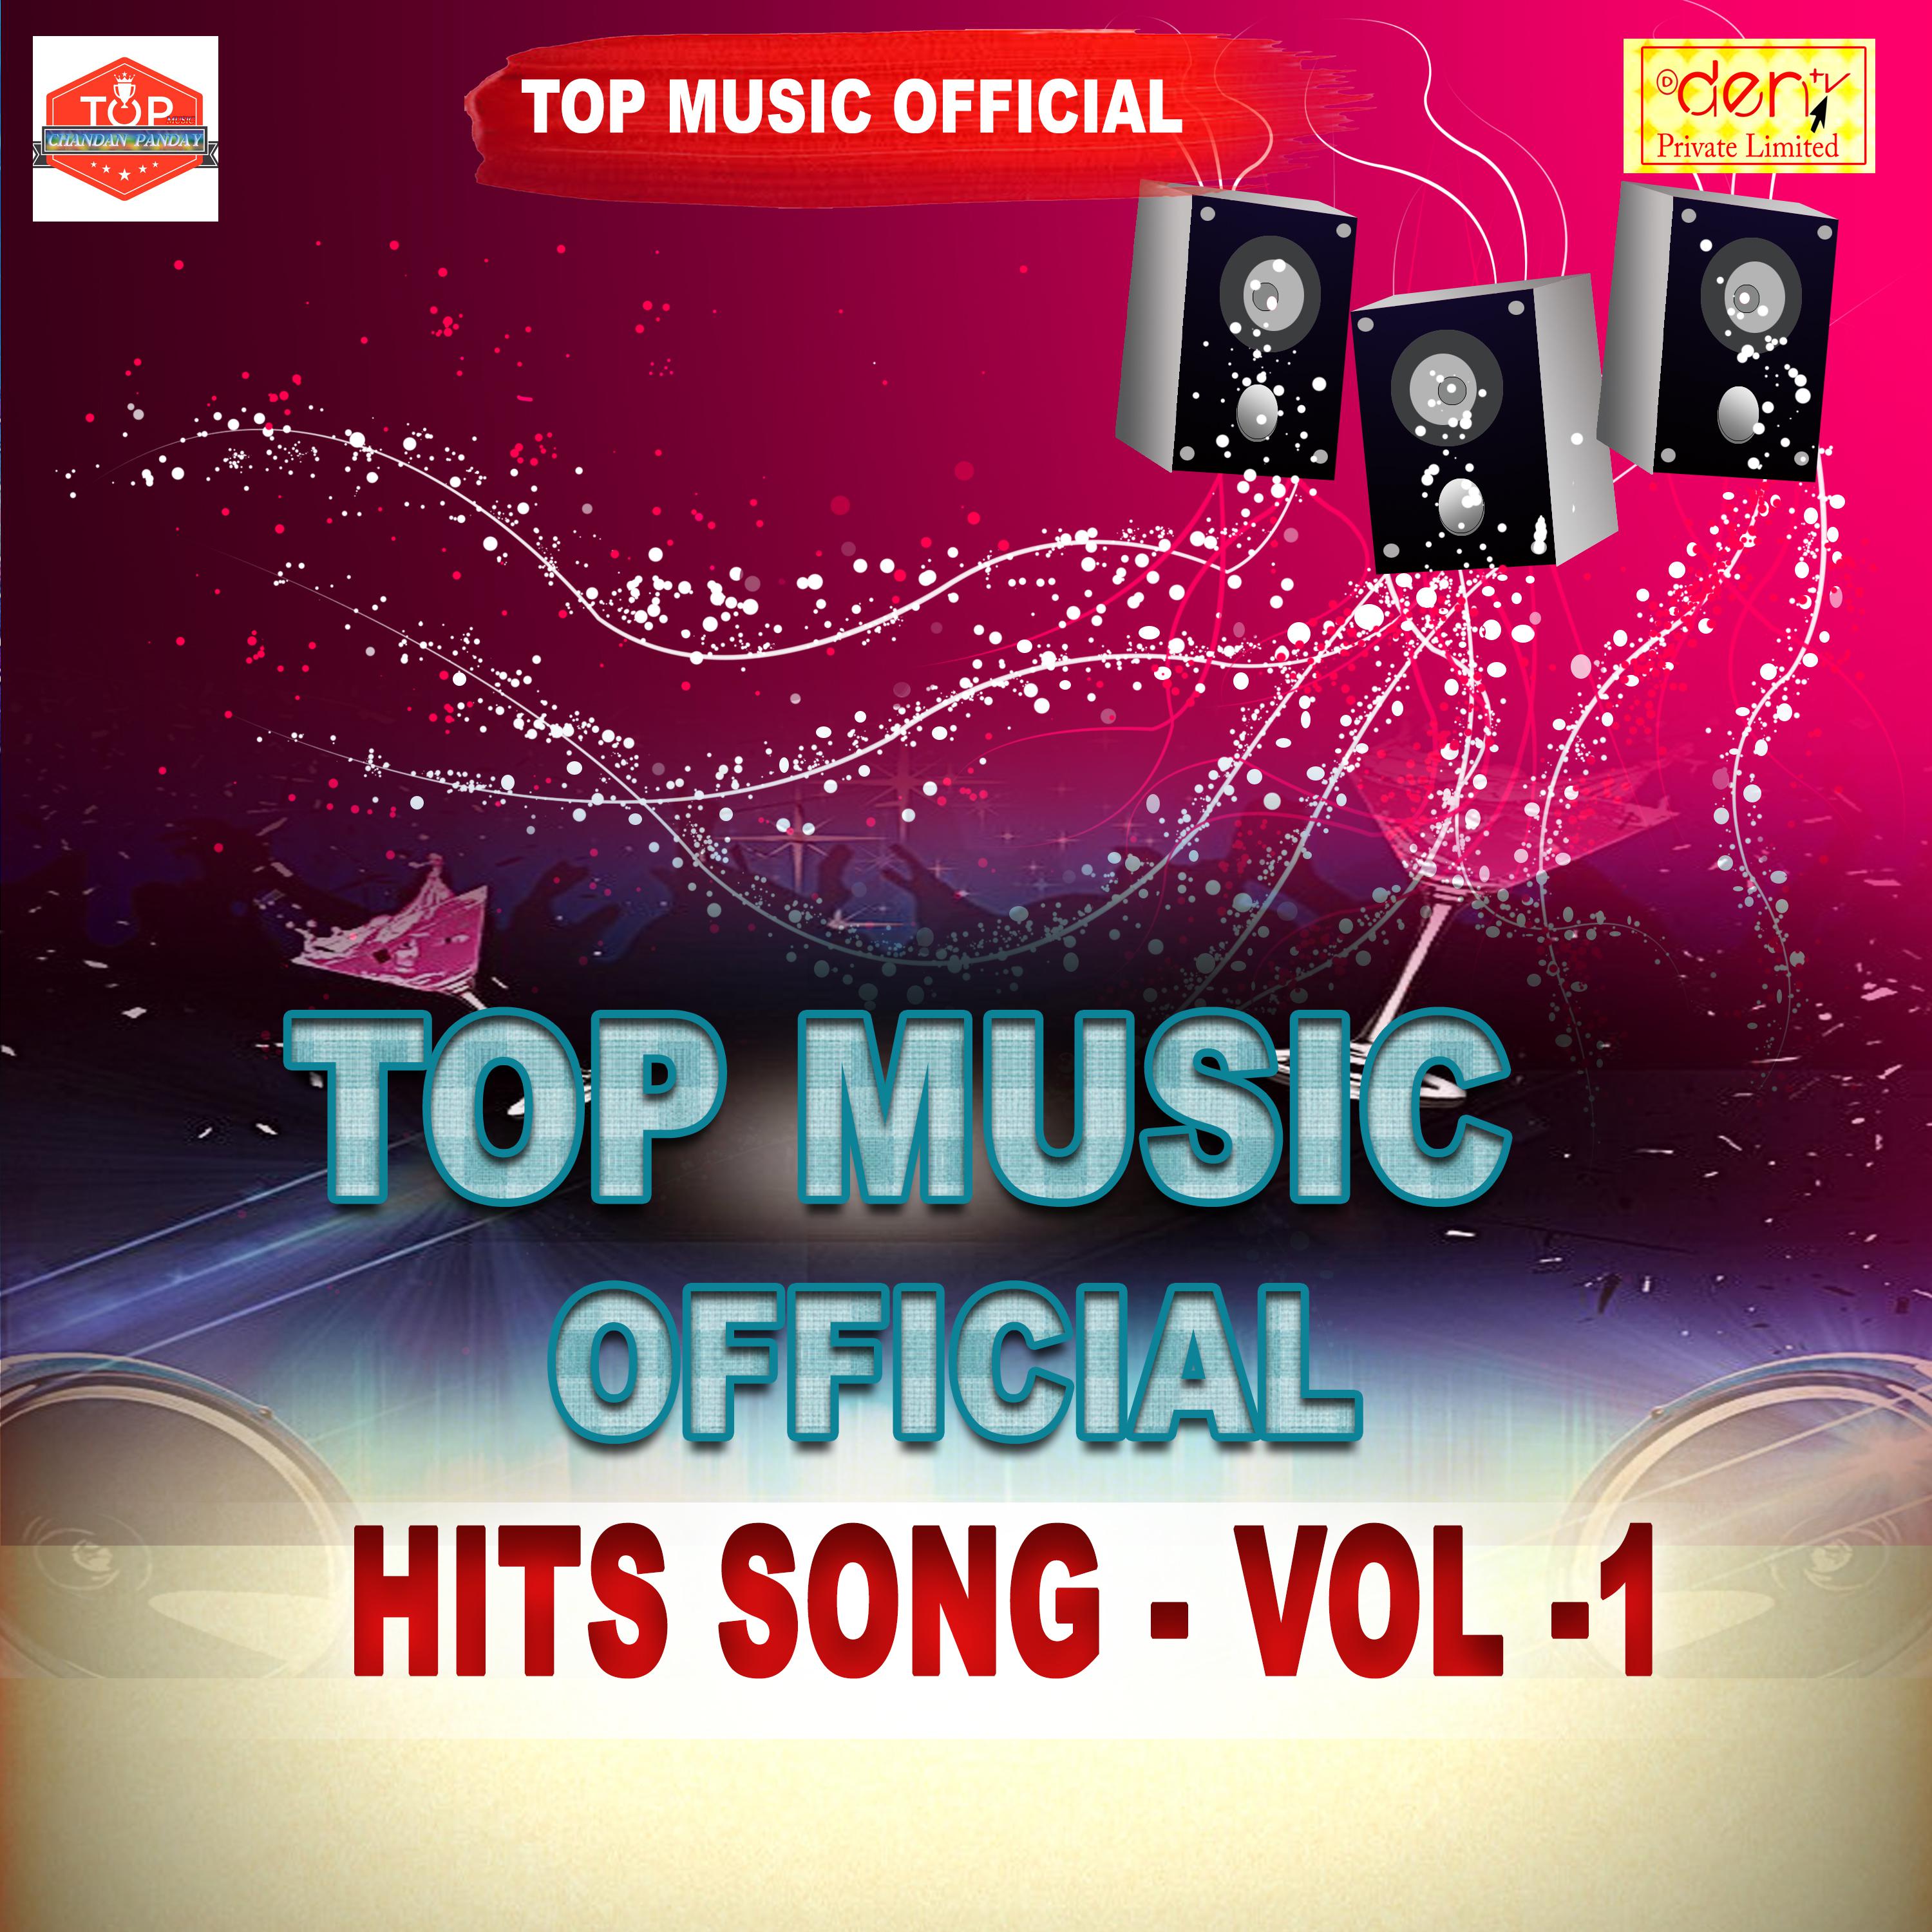 TOP MUSIC OFFICIAL Hits Vol - 1